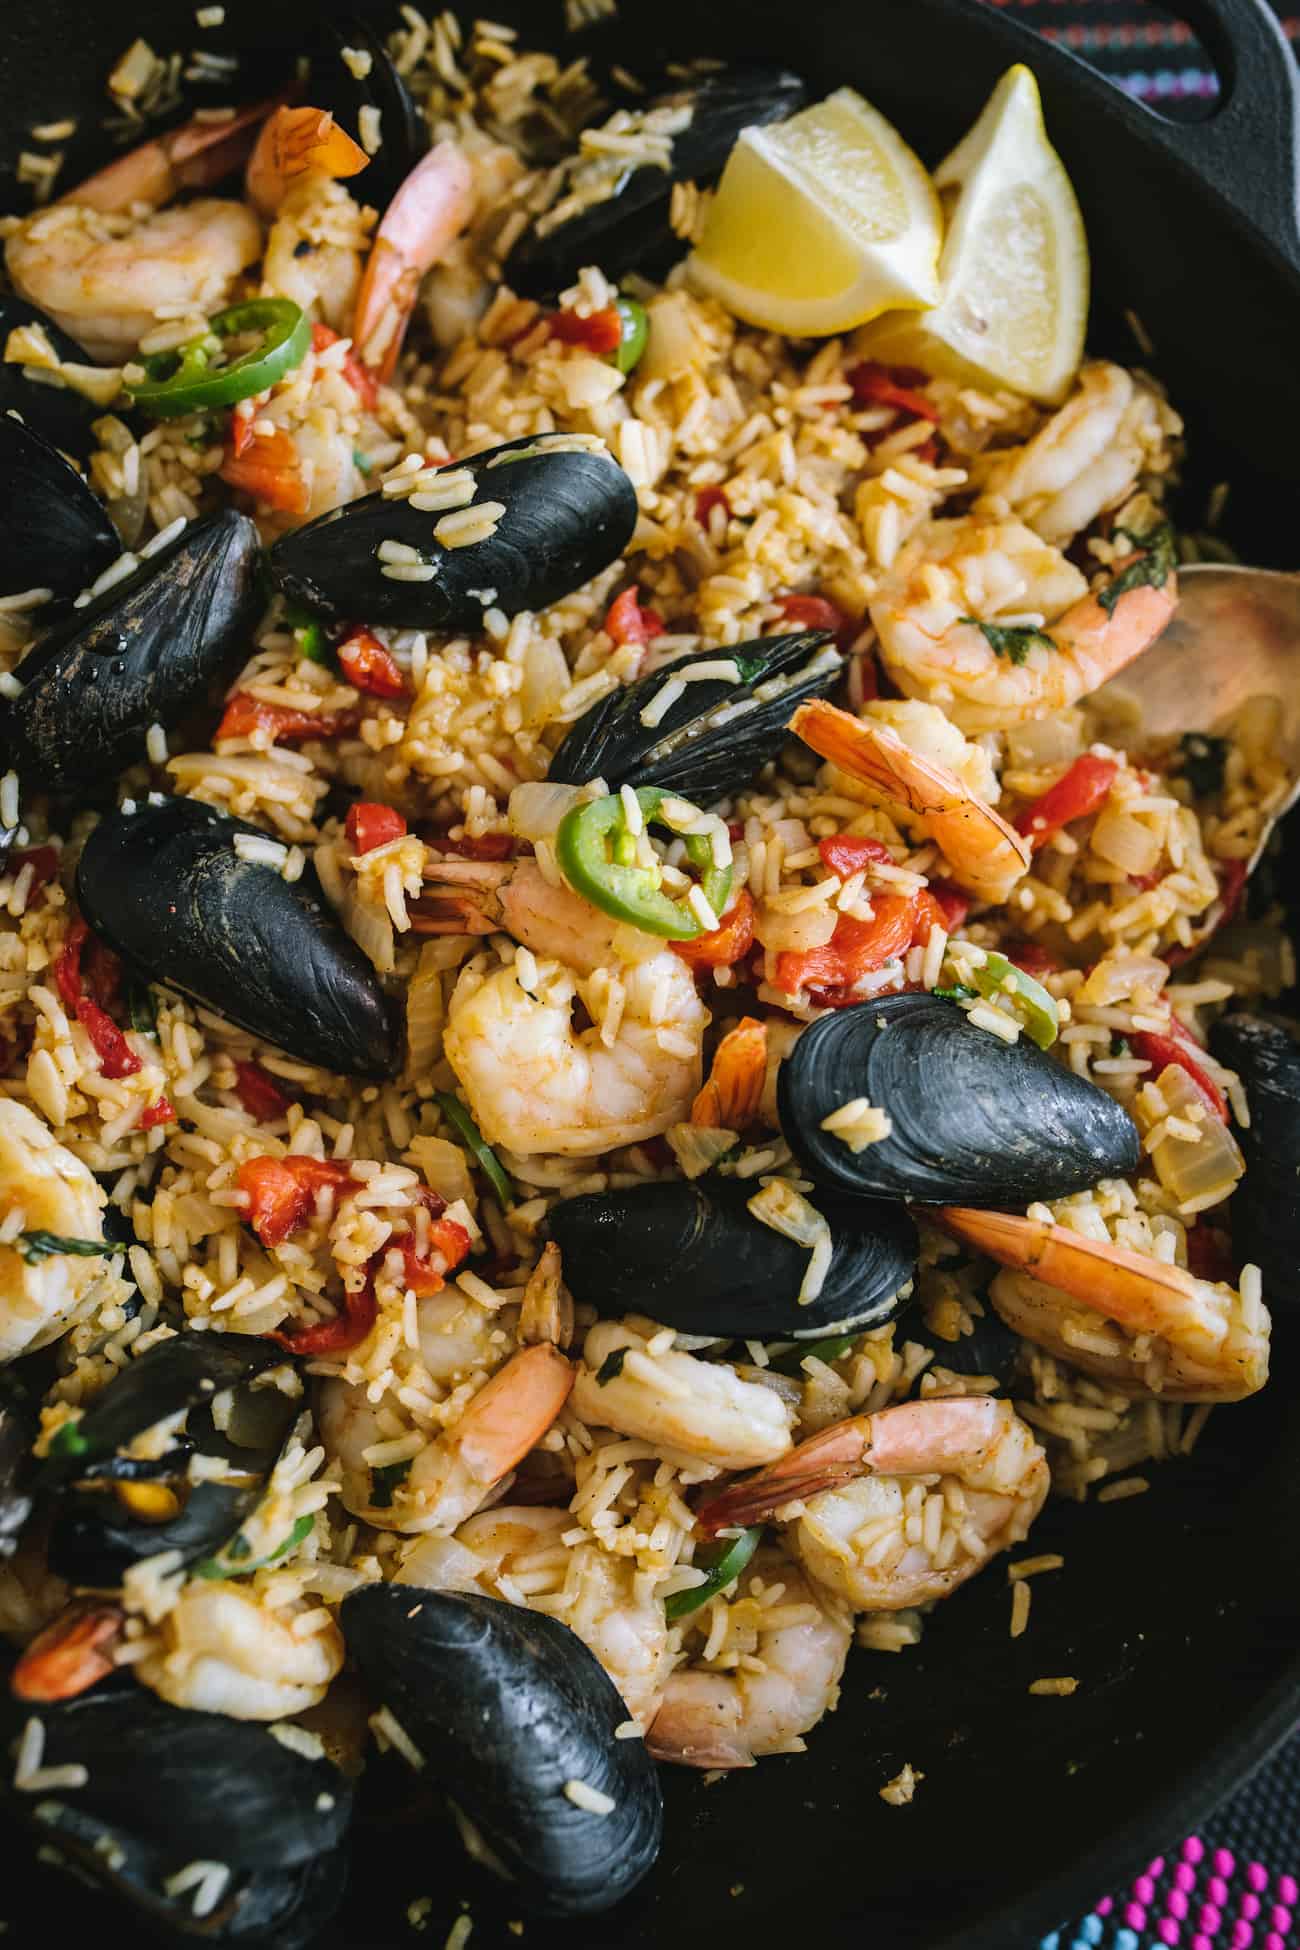 Stovetop Paella Mixta for Four With Pork, Chicken, and Shrimp Recipe